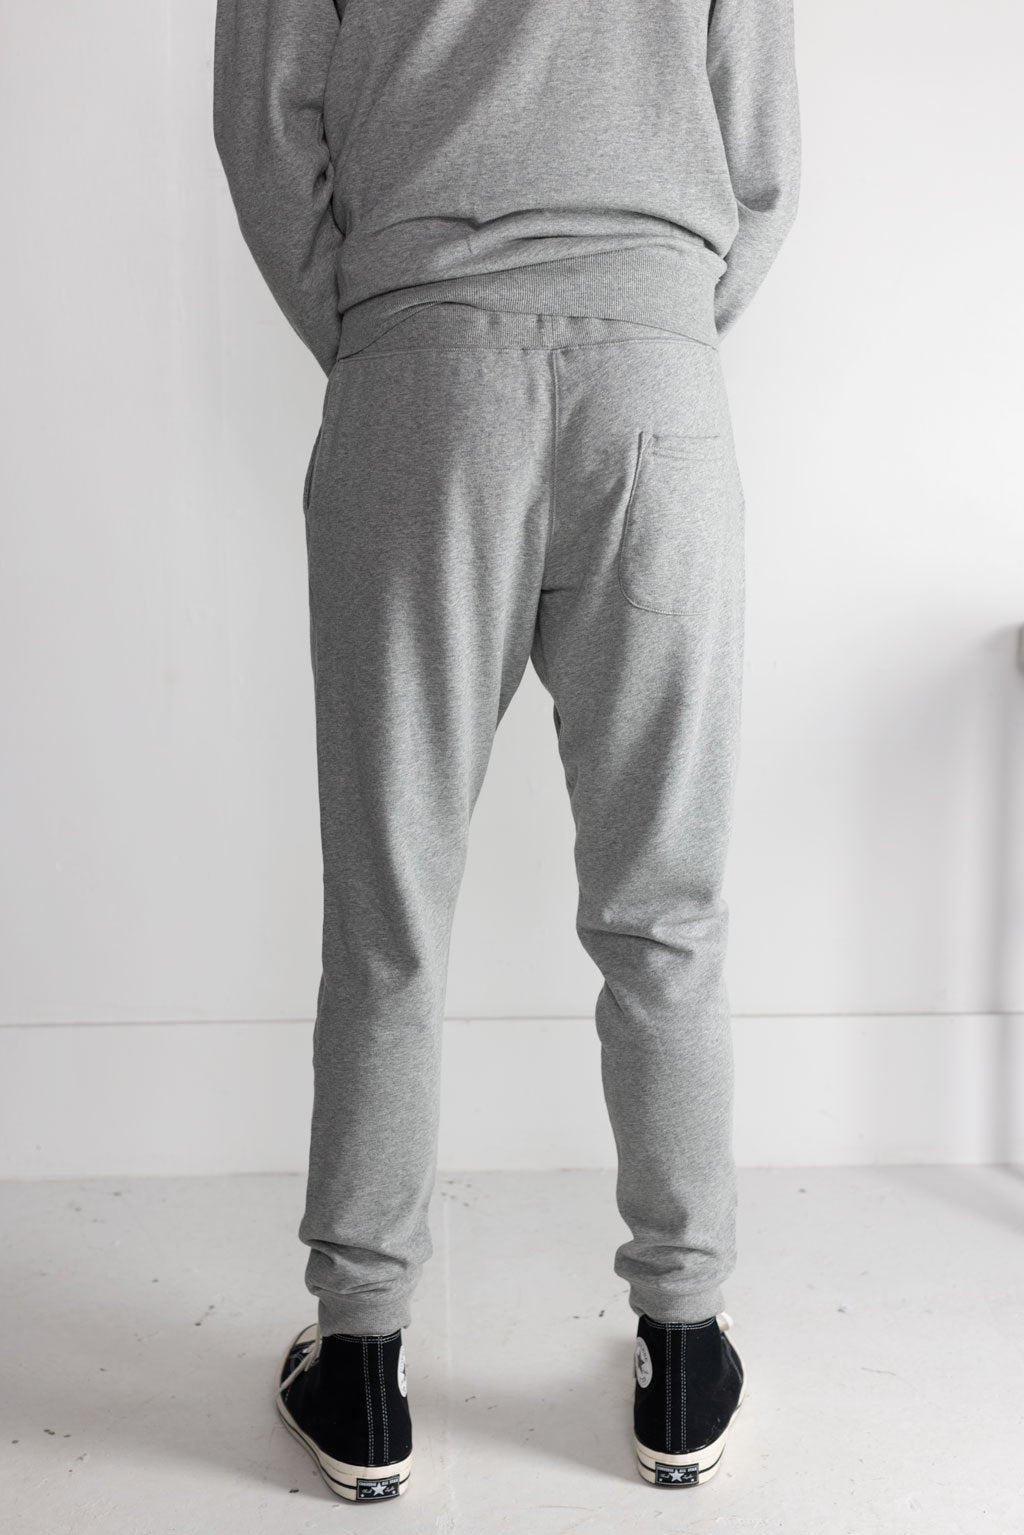 Grey French Terry Baby Joggers - Hatley US